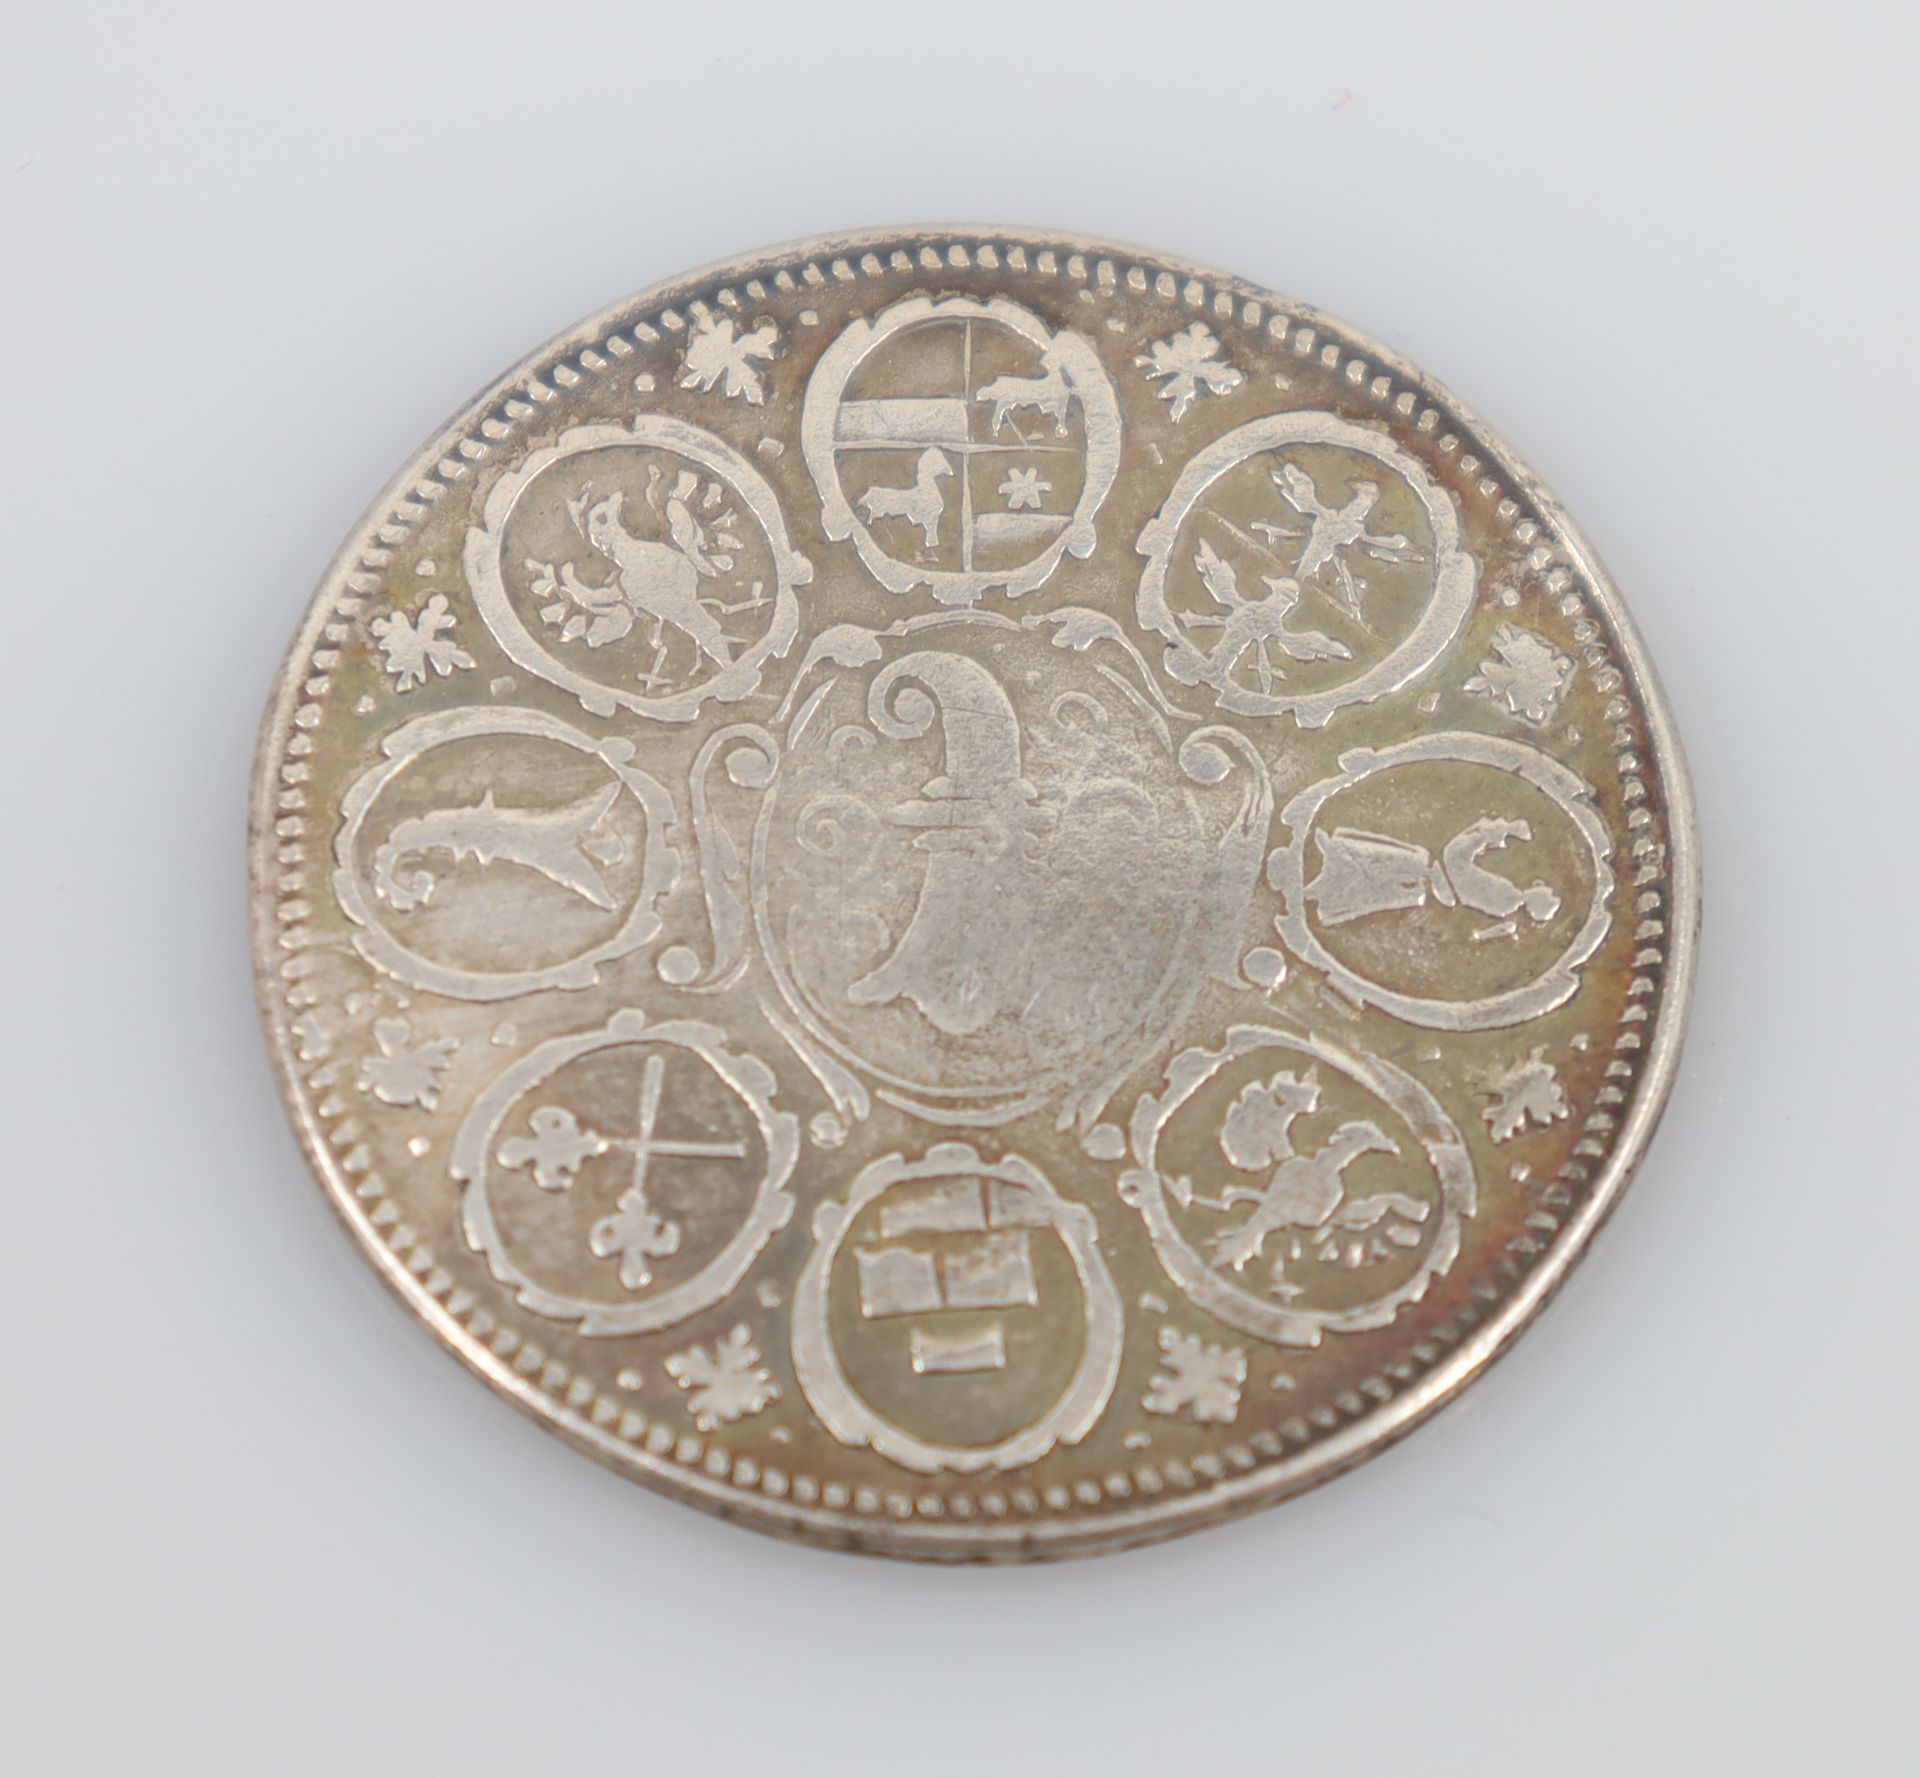 1/4 thaler. BASEL. silver coin. View of the city. Around 1740. - Image 2 of 3